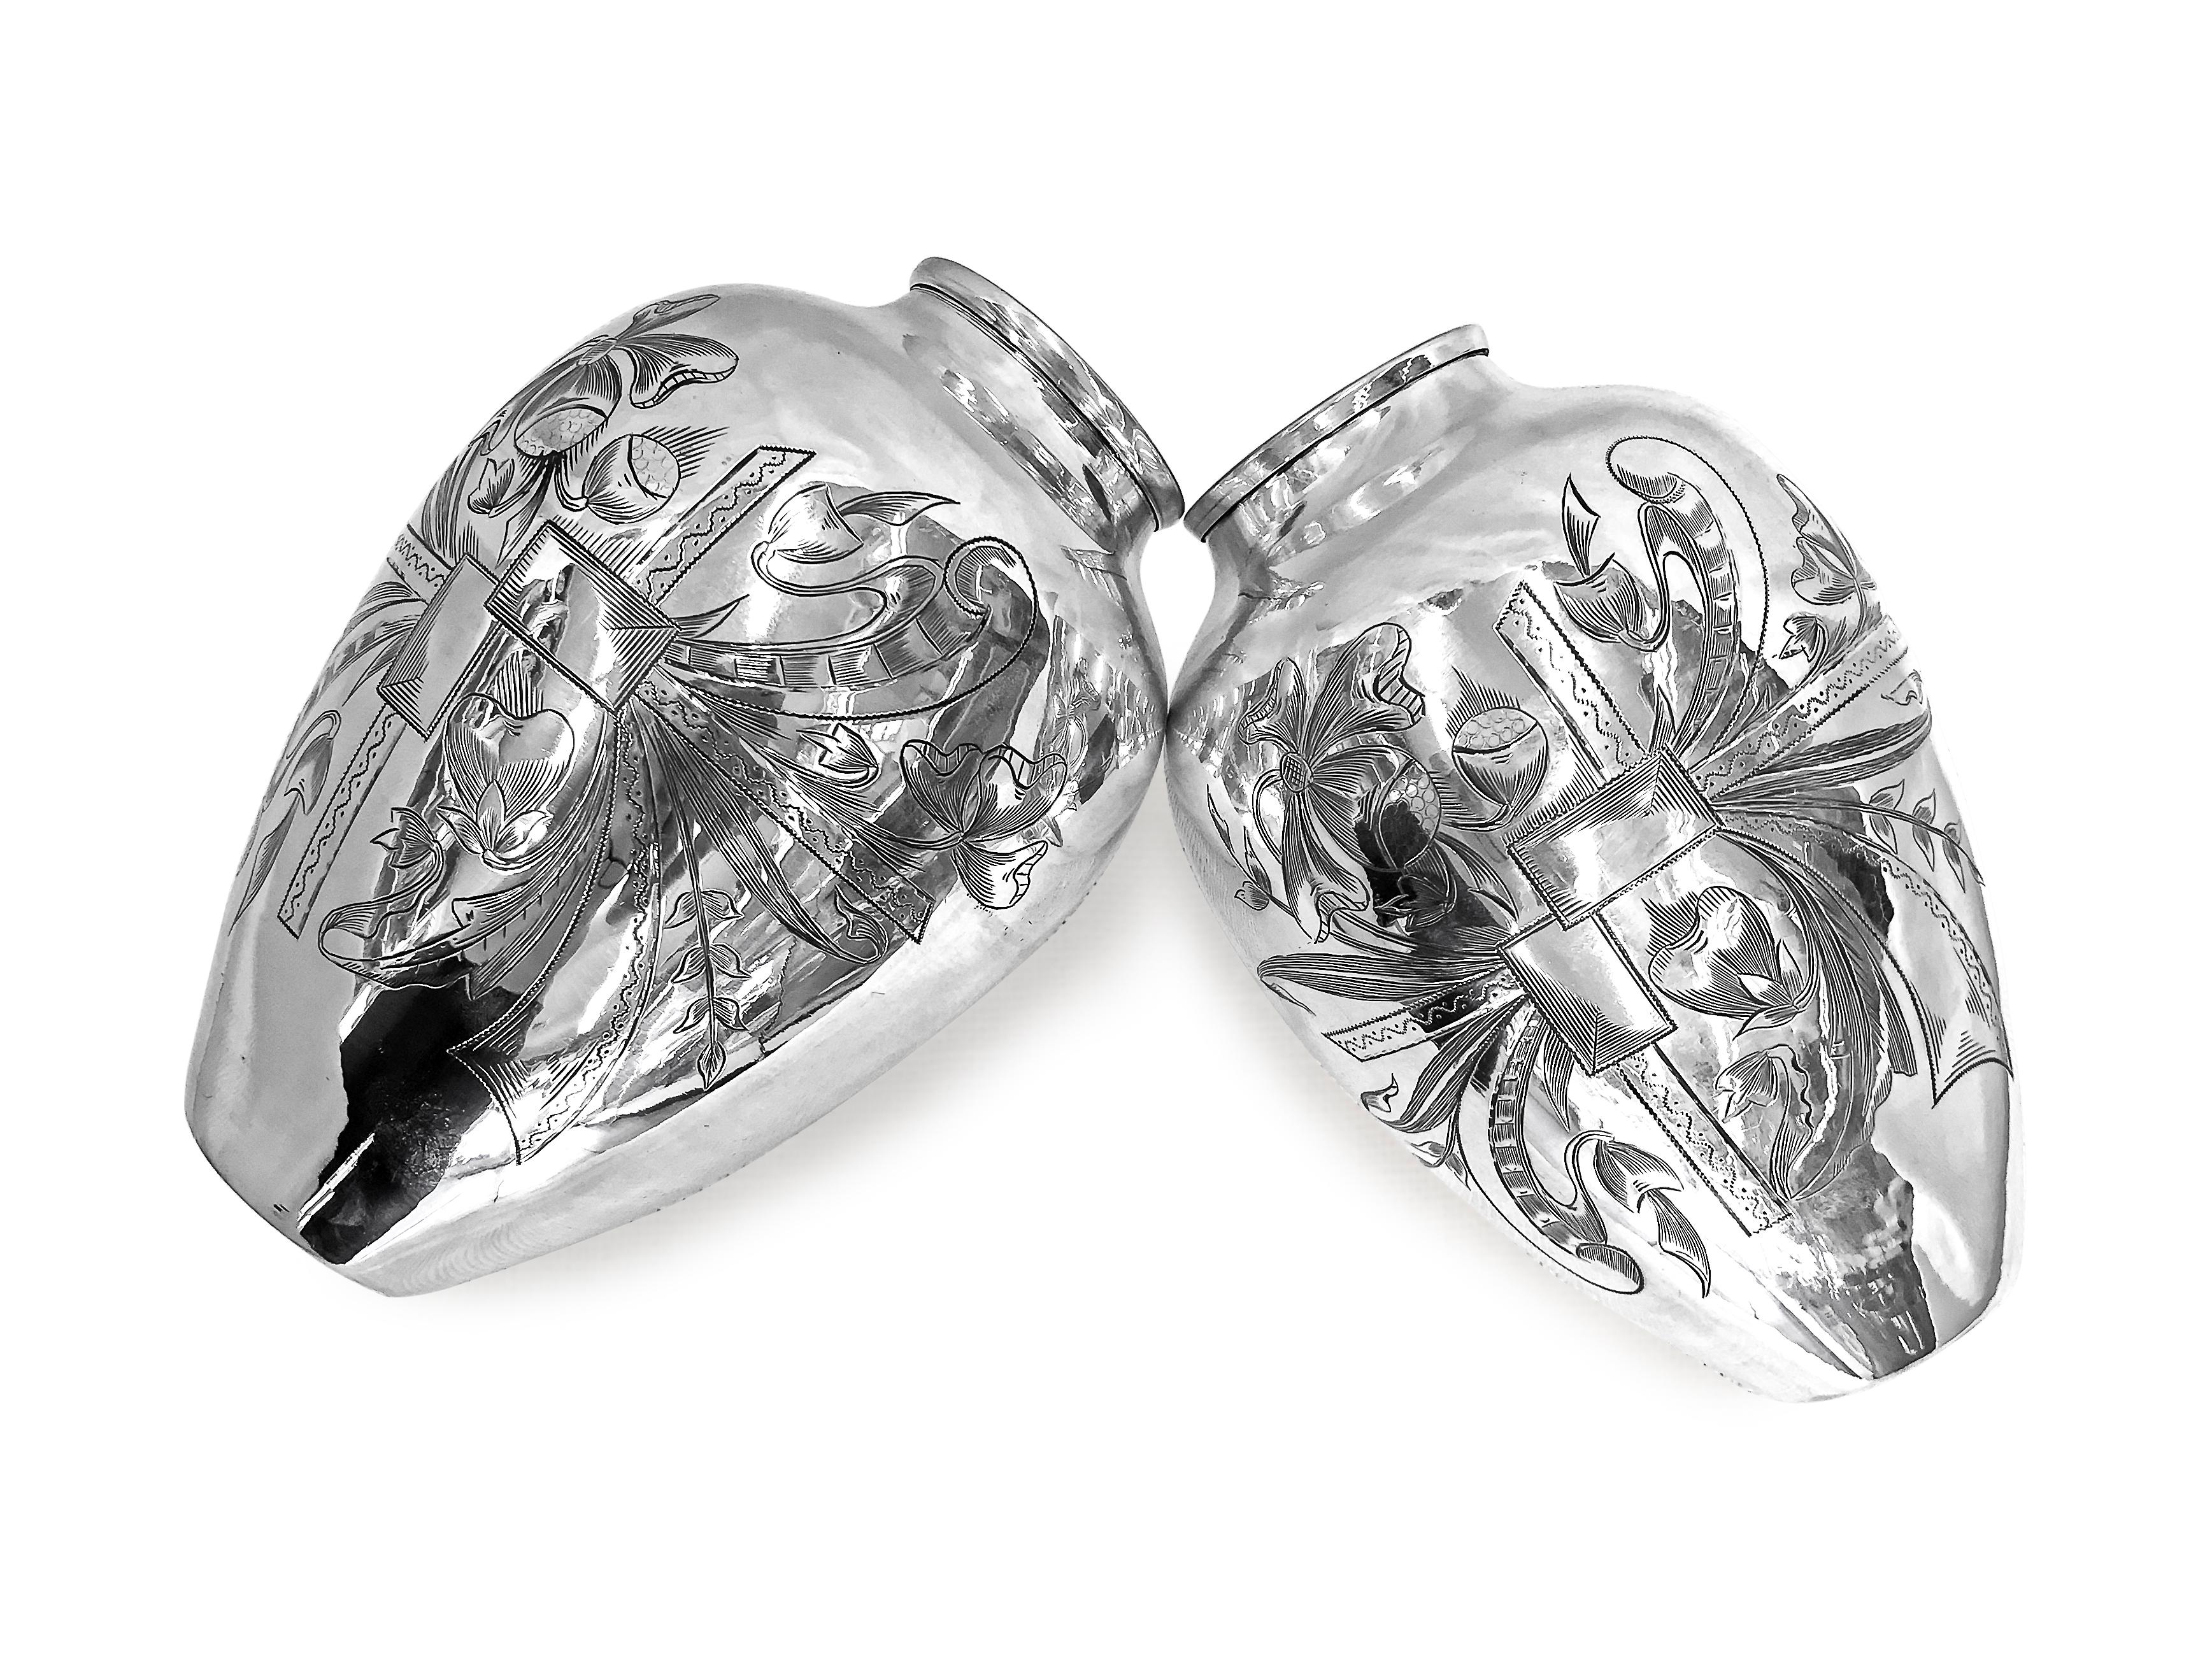 Artisan Old Unique Vase Hand Engraved Delicately, One Pair For Sale